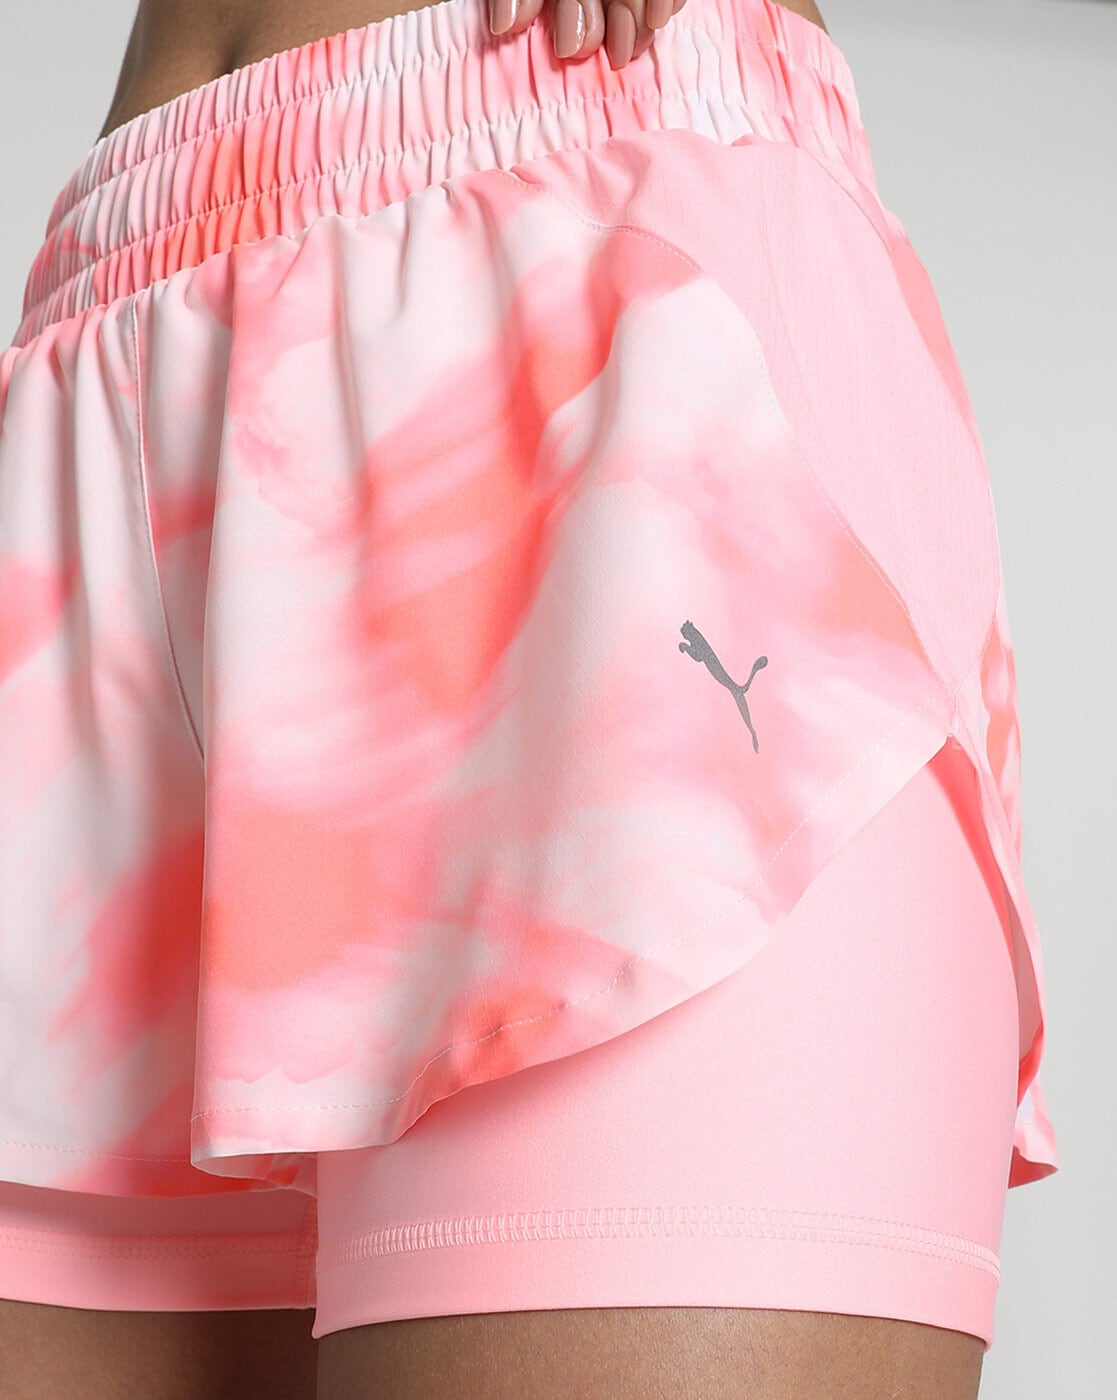 PUMA by Koral Online Ice Shorts Women for Pink Buy